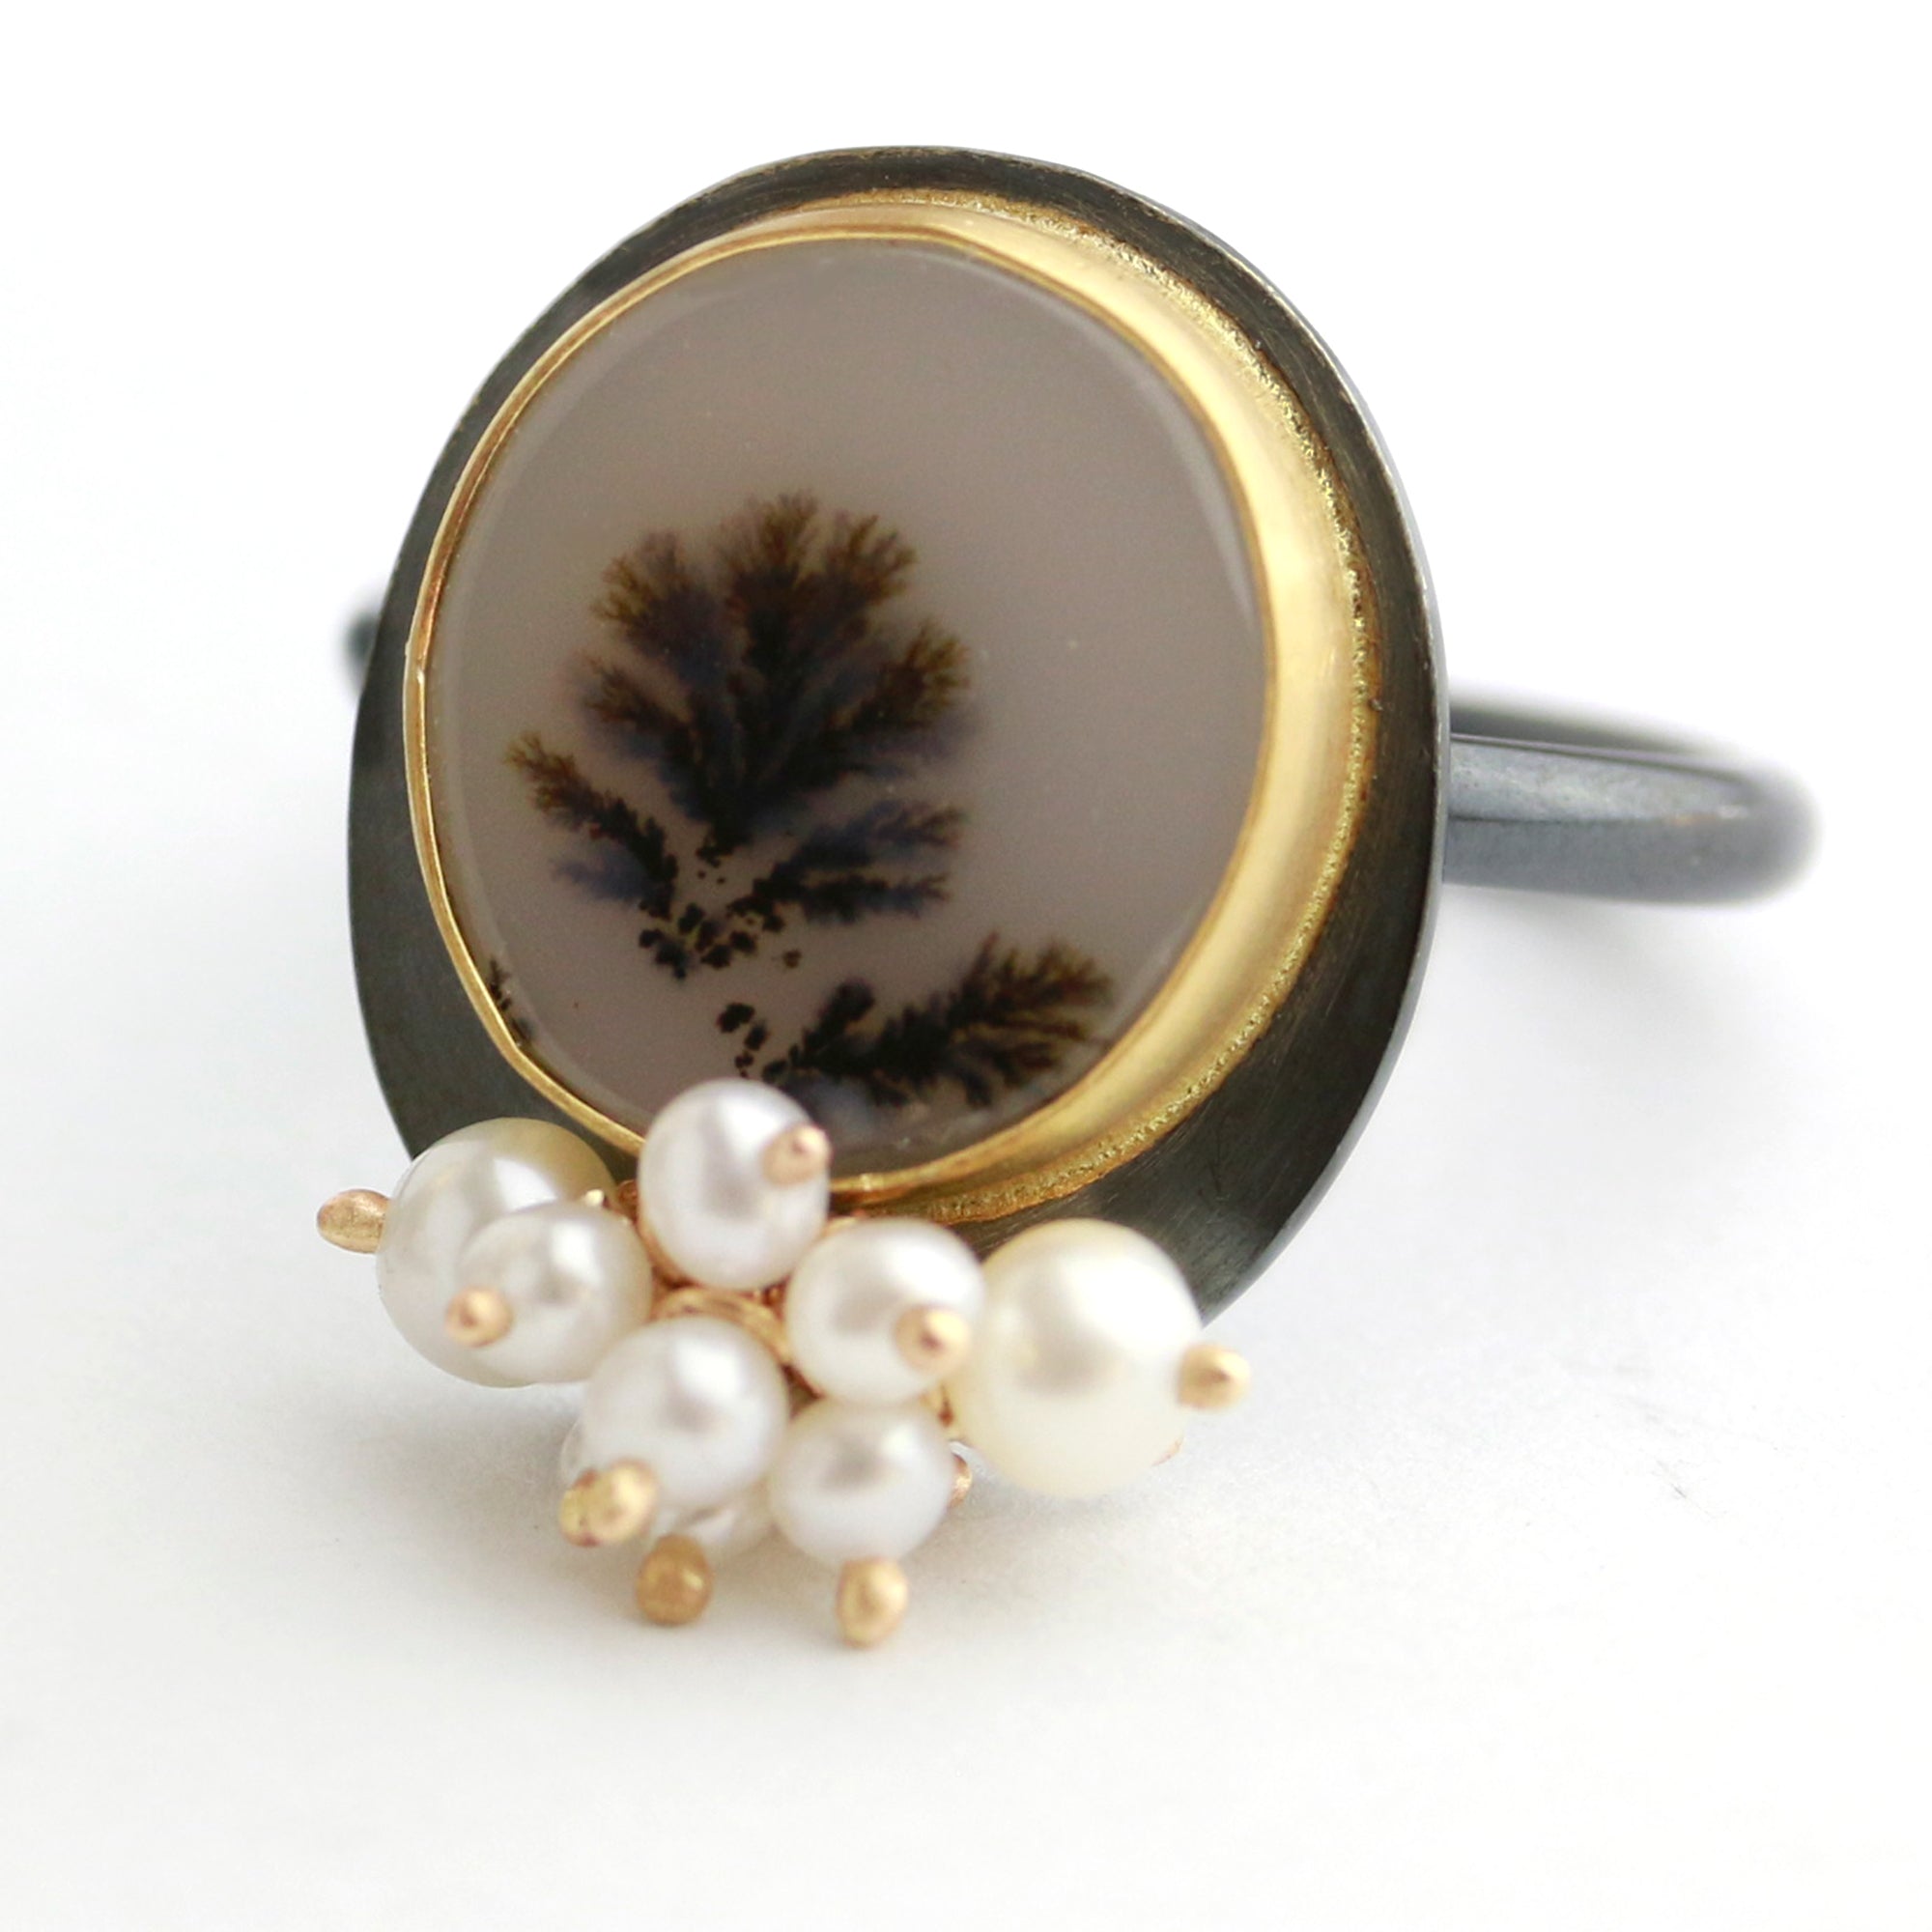 Dendritic Agate and Pearl Cluster Ring. Size 6 1/4.